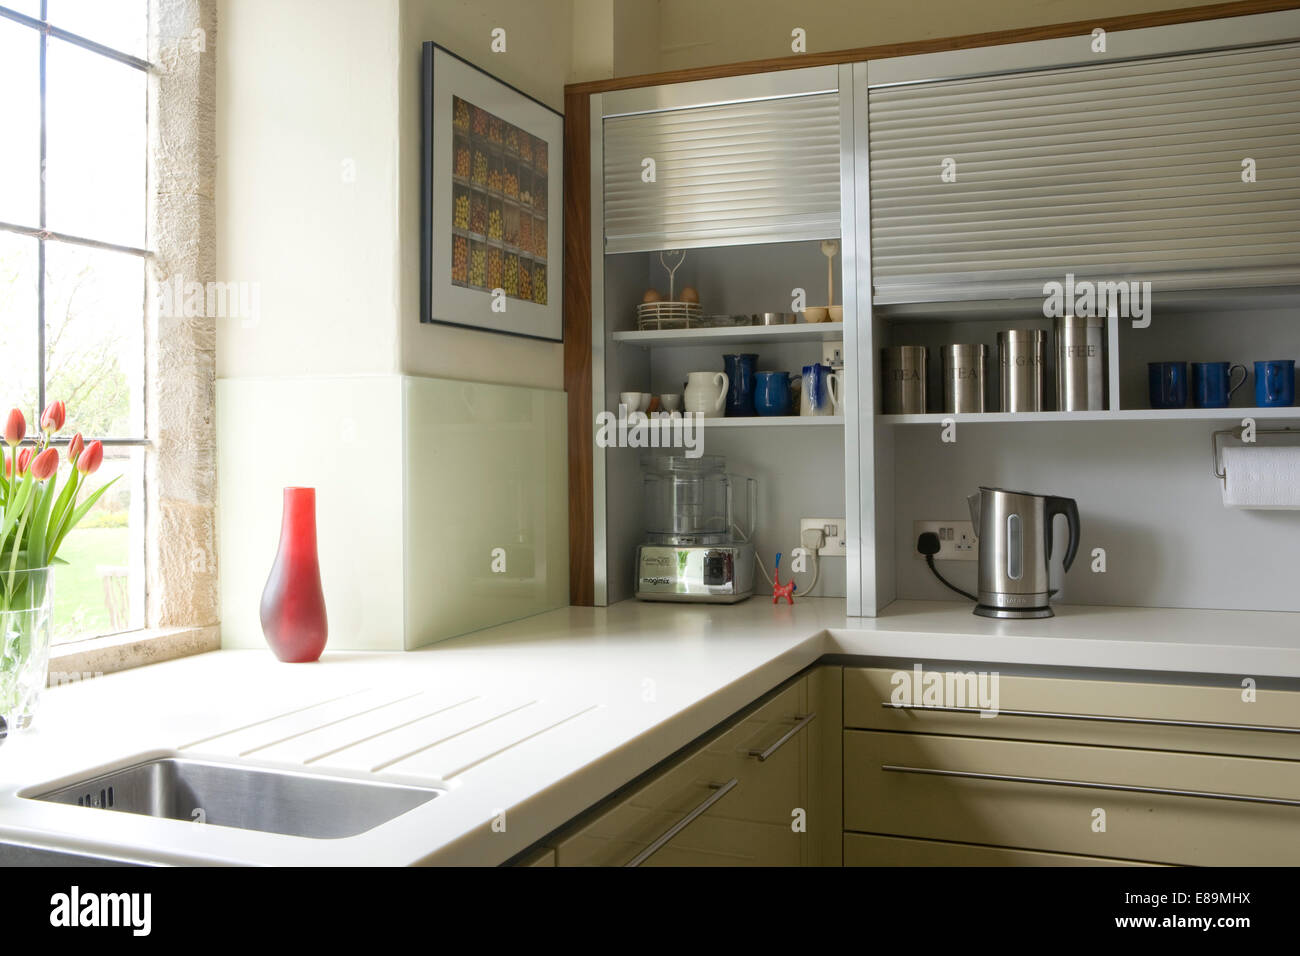 Modern Kitchen With Raised Tambour Shutters On Storage Cabinets